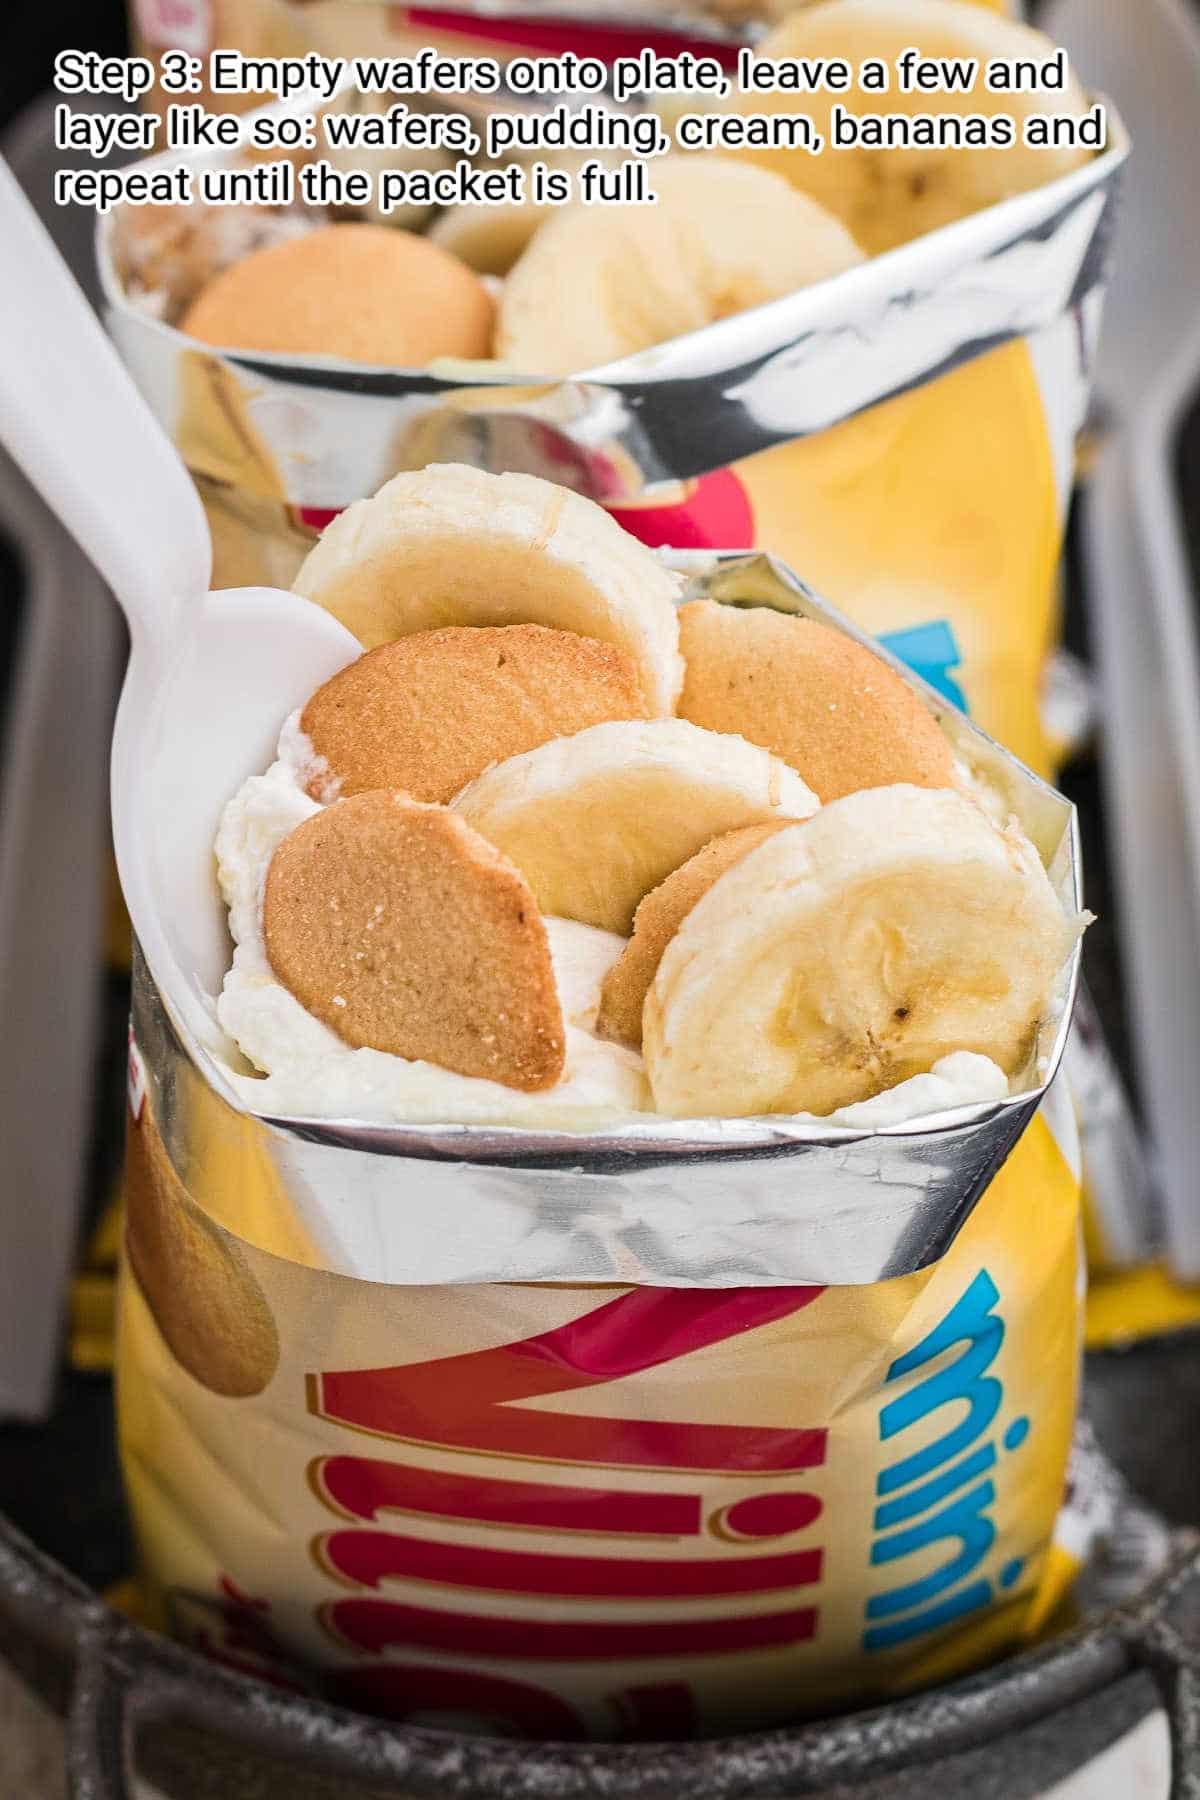 close up picture of a walking banana pudding - a bag of vanilla wafers that has been filled with bananas, cream and pudding